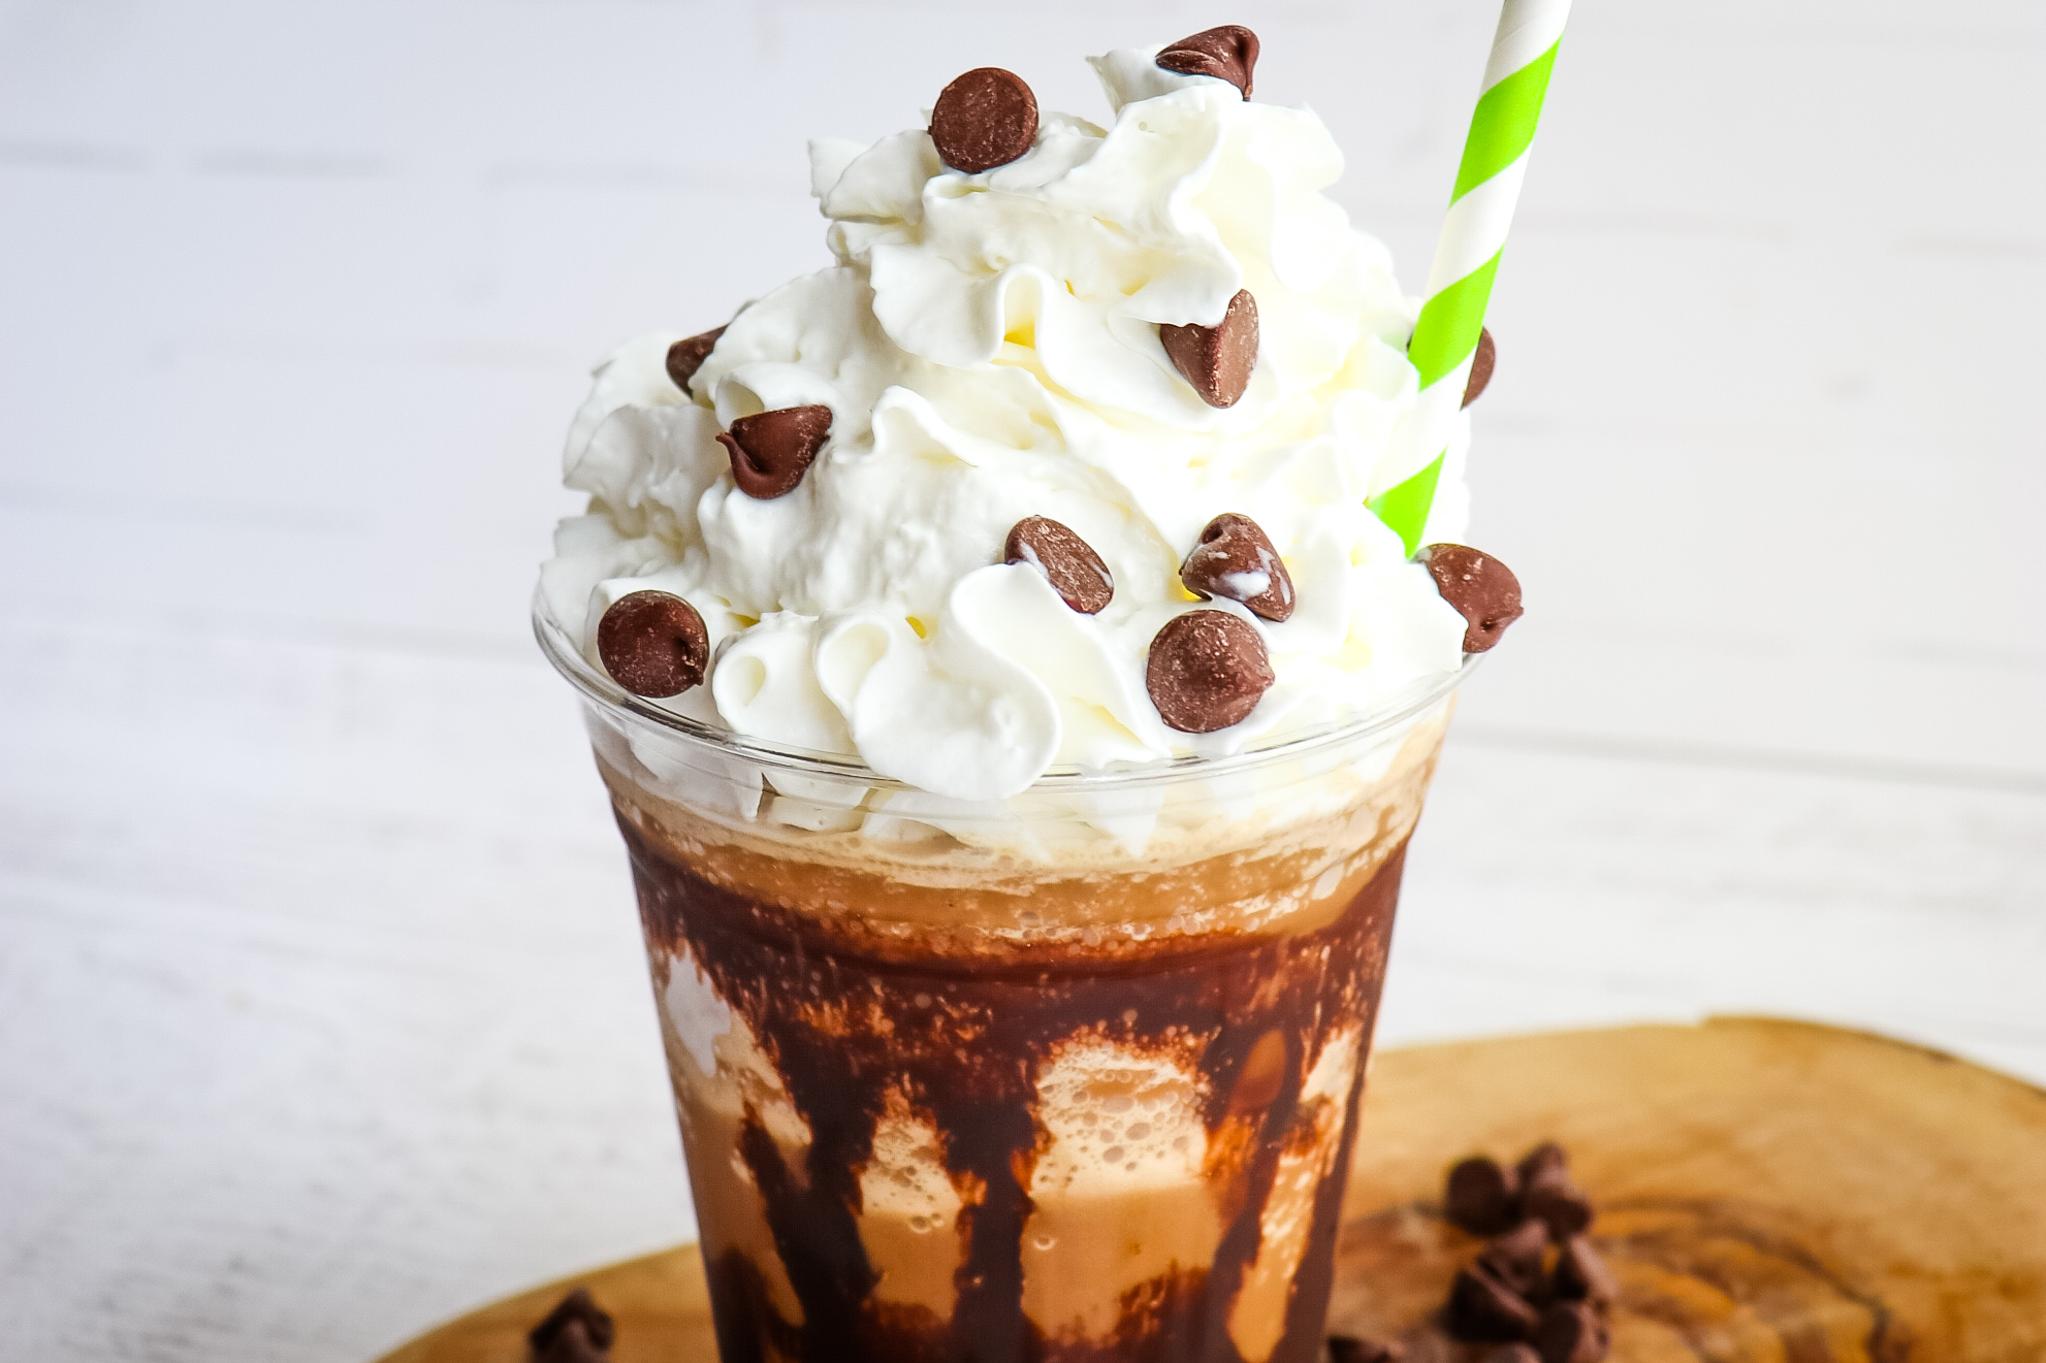  Summer may be over, but this iced mocha frappuccino is perfect year-round.